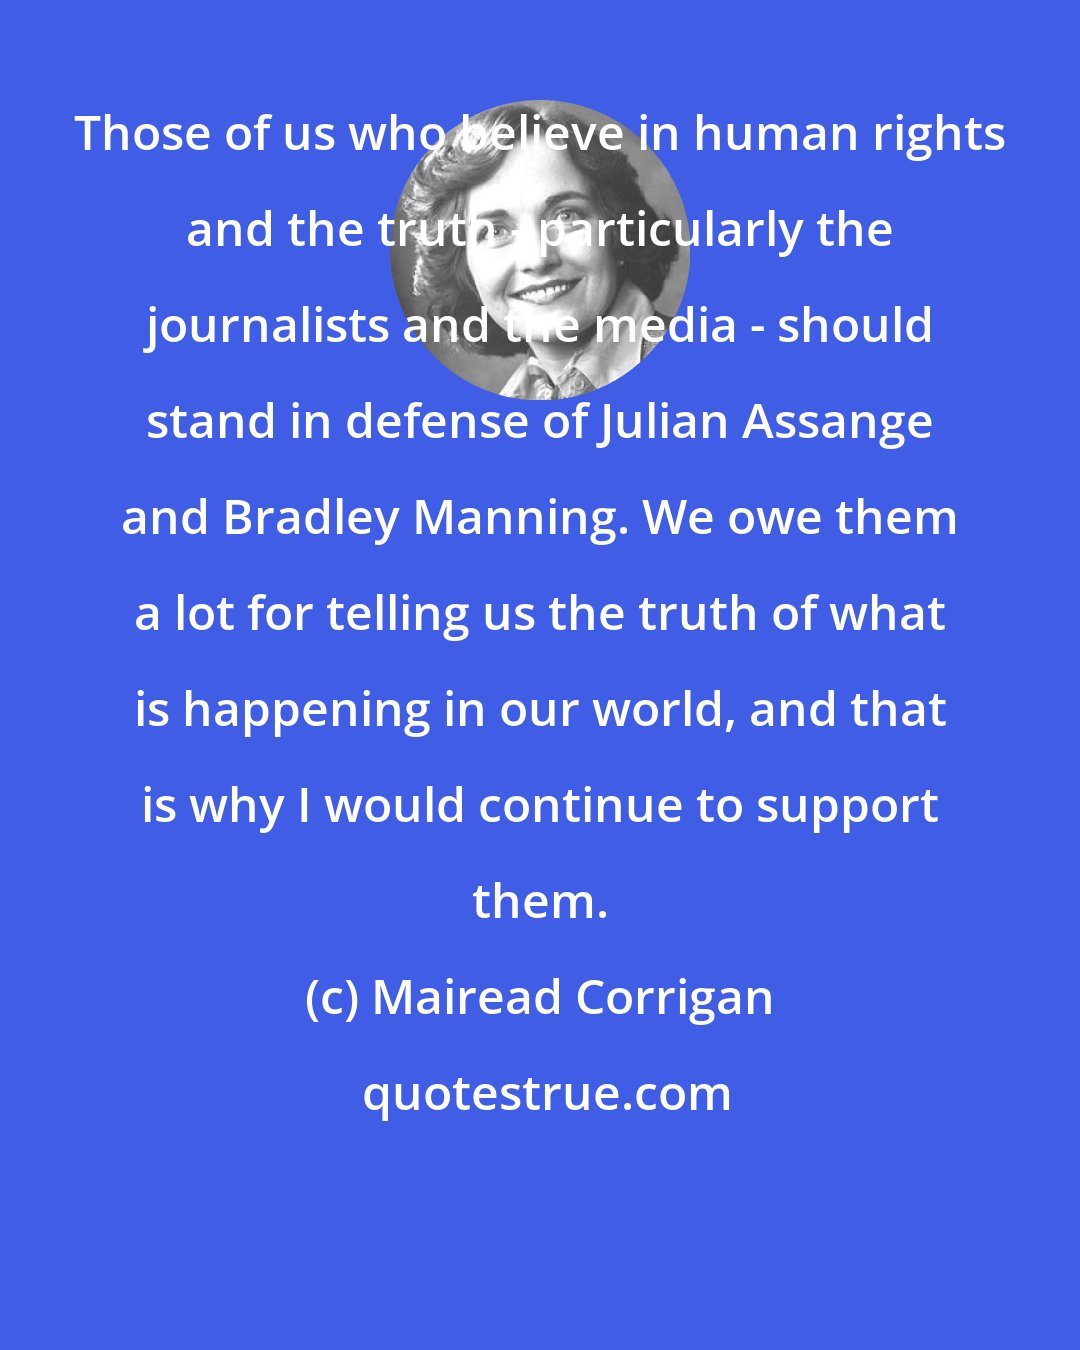 Mairead Corrigan: Those of us who believe in human rights and the truth - particularly the journalists and the media - should stand in defense of Julian Assange and Bradley Manning. We owe them a lot for telling us the truth of what is happening in our world, and that is why I would continue to support them.